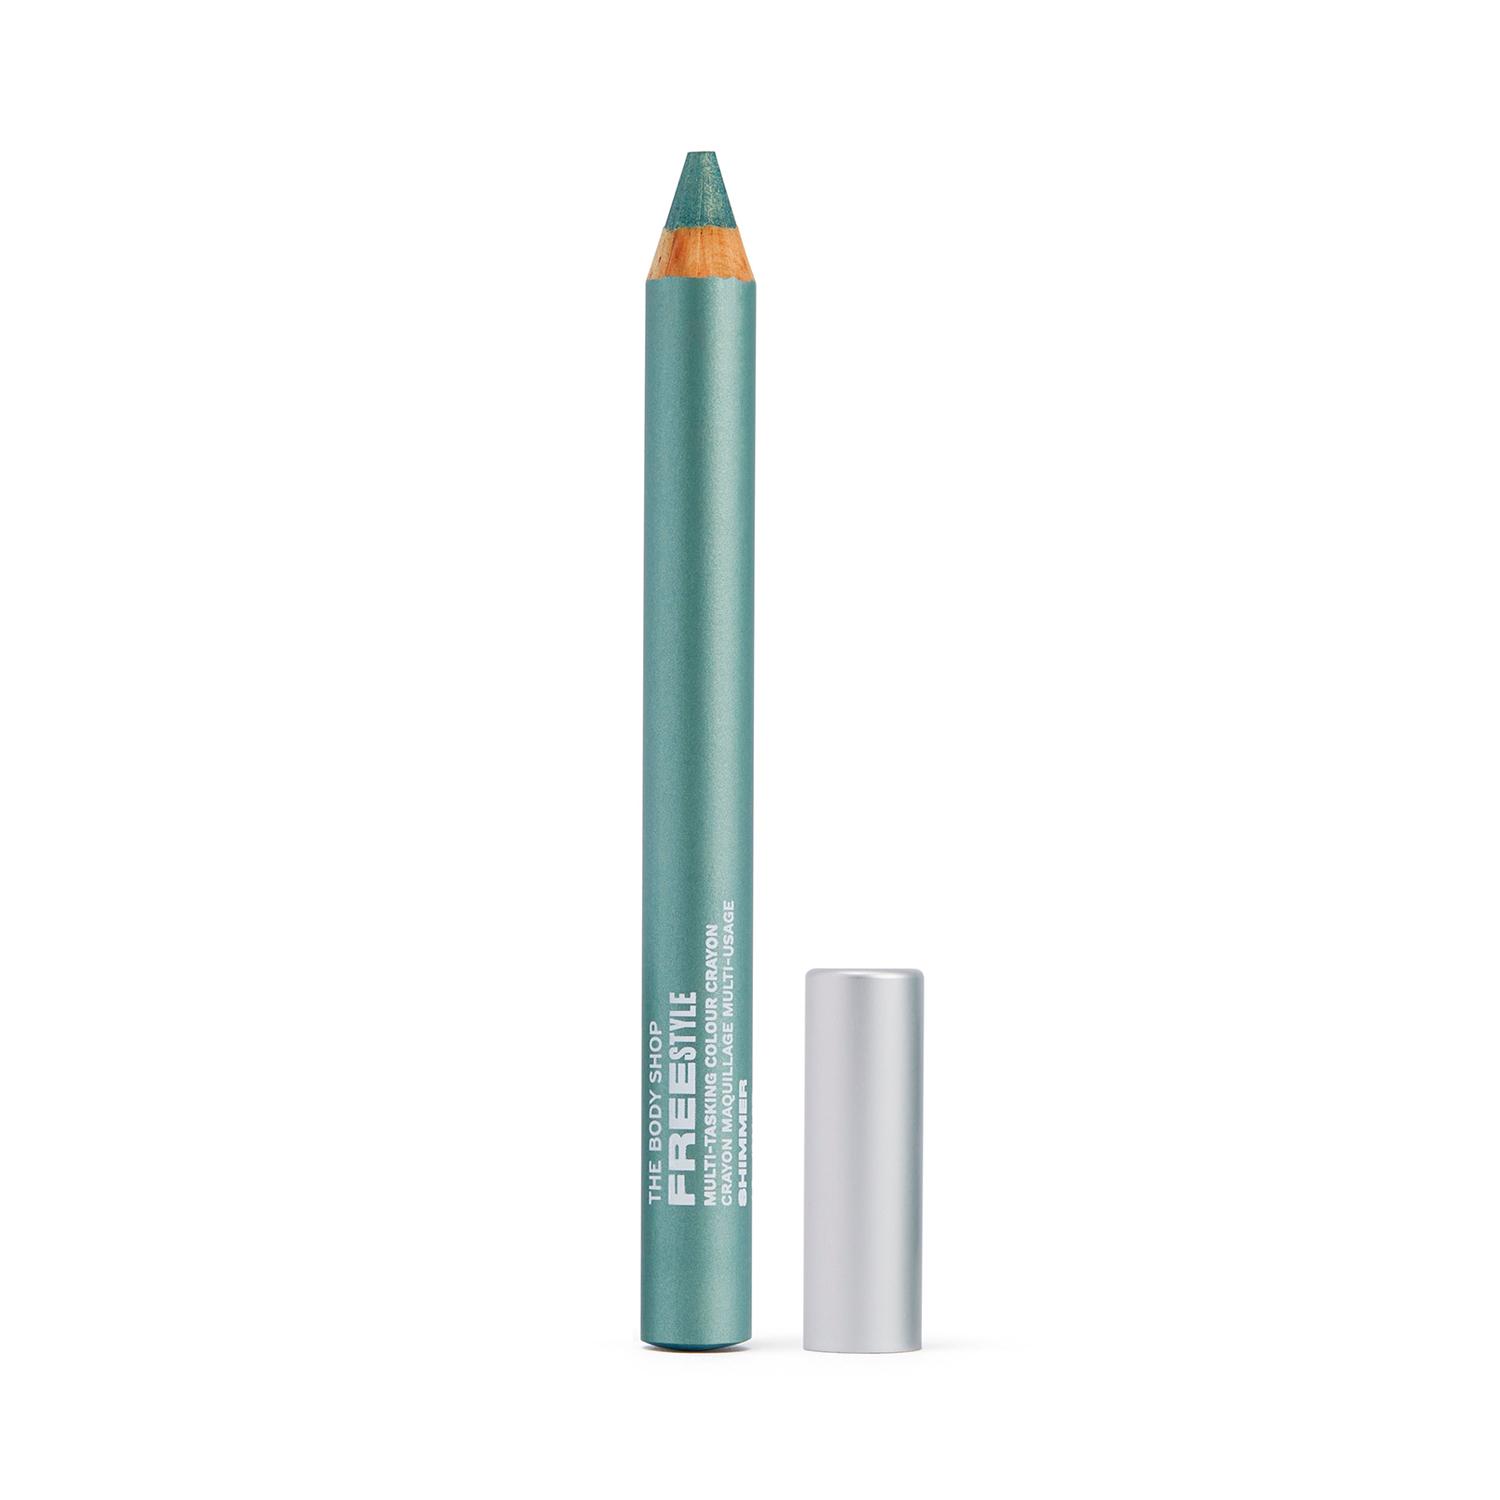 The Body Shop | The Body Shop Freestyle Multi-Tasking Crayons - Unfazed (4.2 g